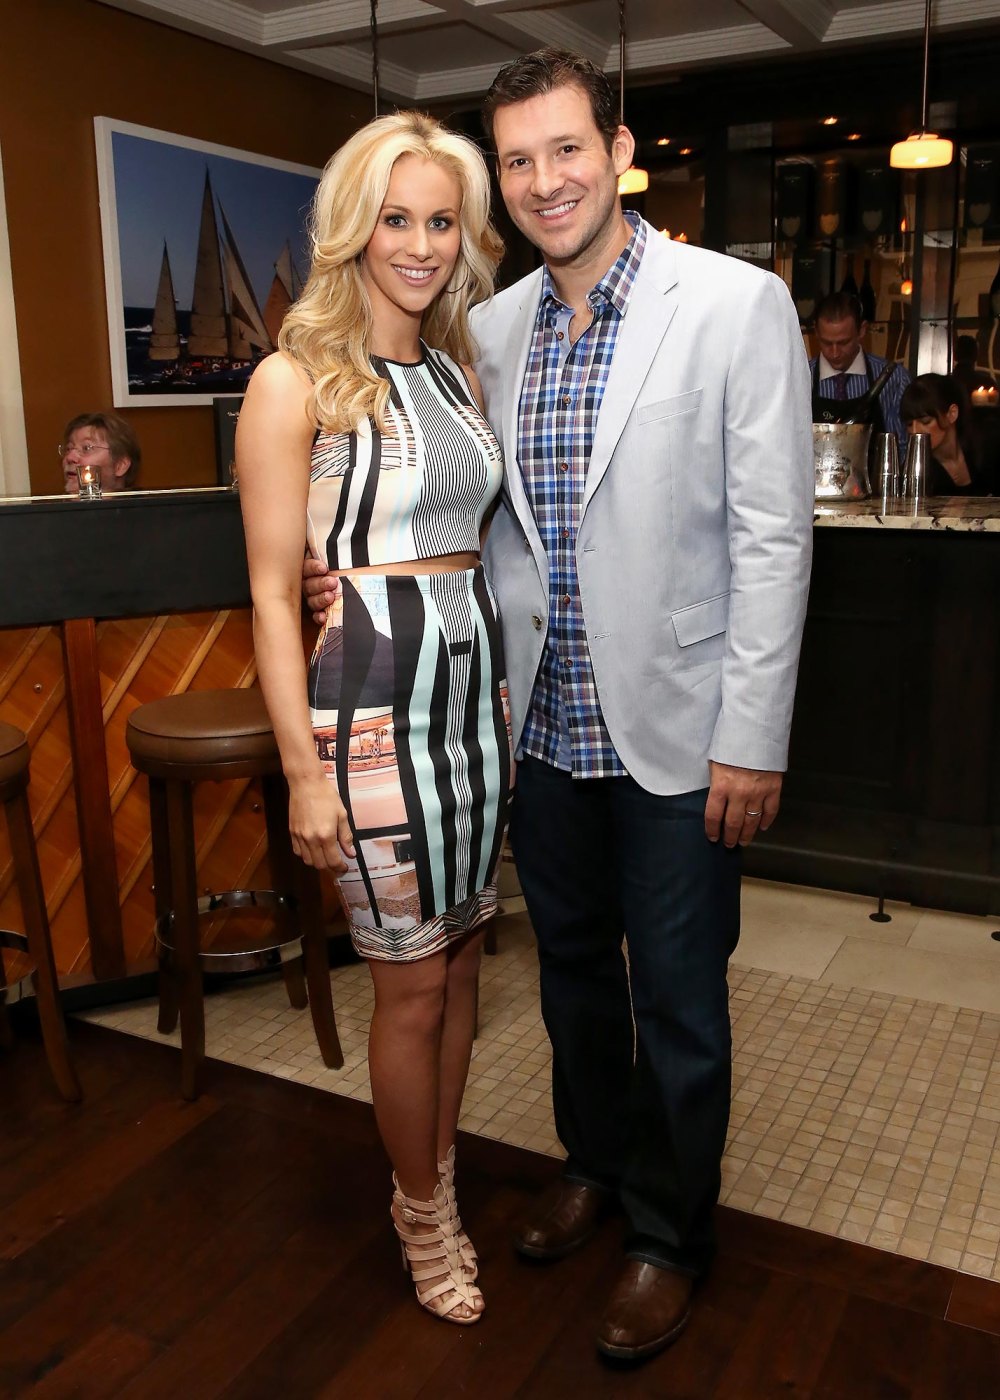 Tony Romo and Wife Candice Crawford's Relationship Timeline: From Dallas Cowboys to Parents of 3